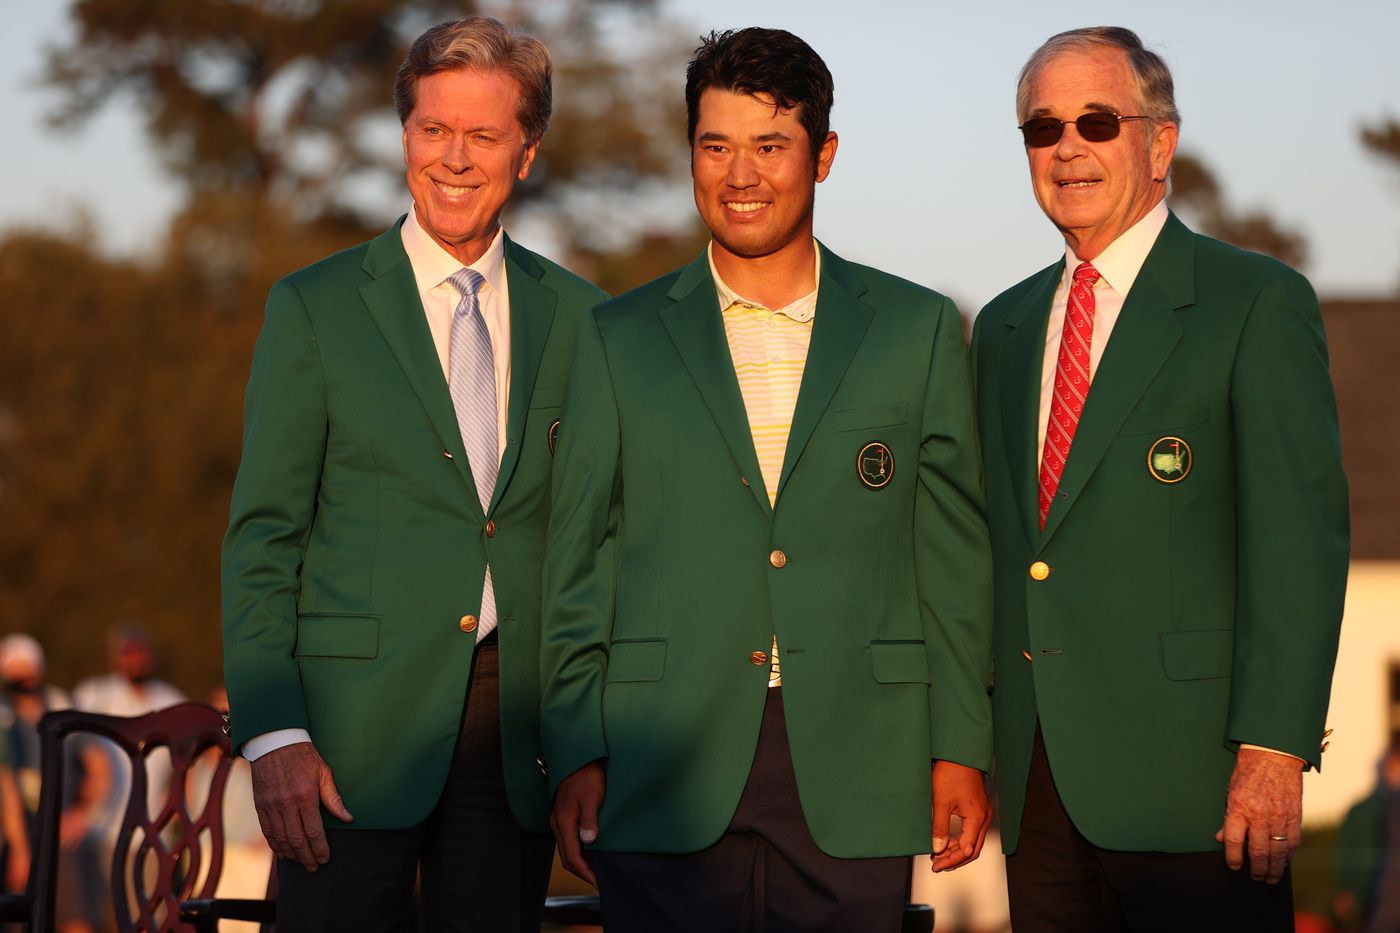 Masters Tournament history: Records of winners at Augusta National, who has  the most wins? - DraftKings Network